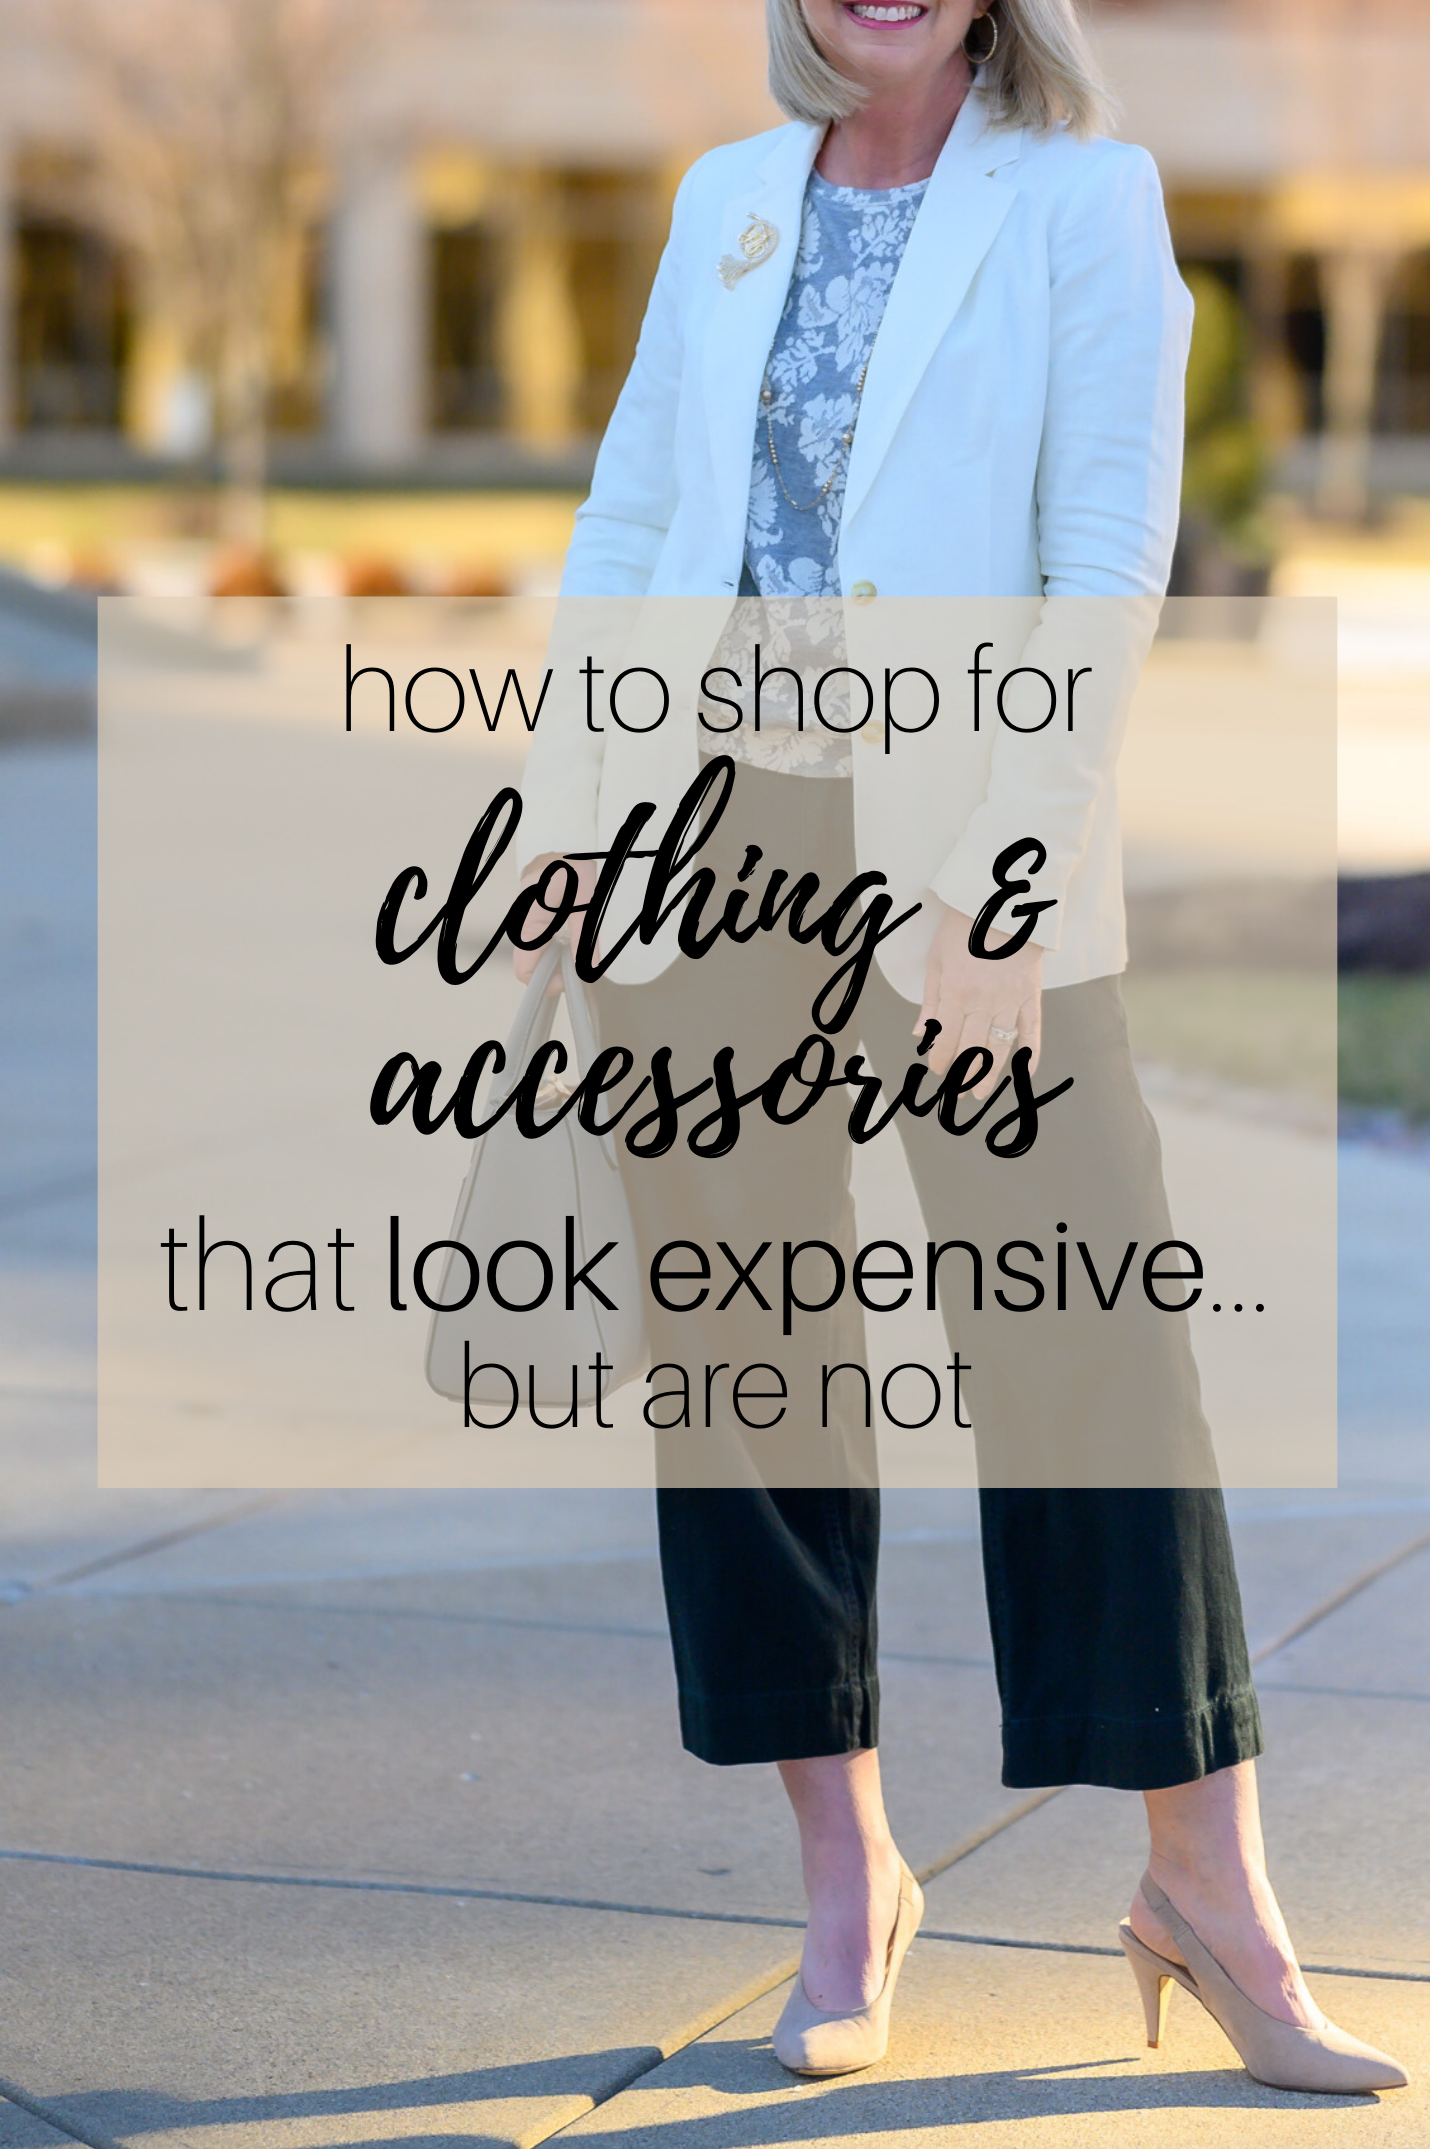 How to Shop for Clothing & Accessories that Look Expensive...but really are not